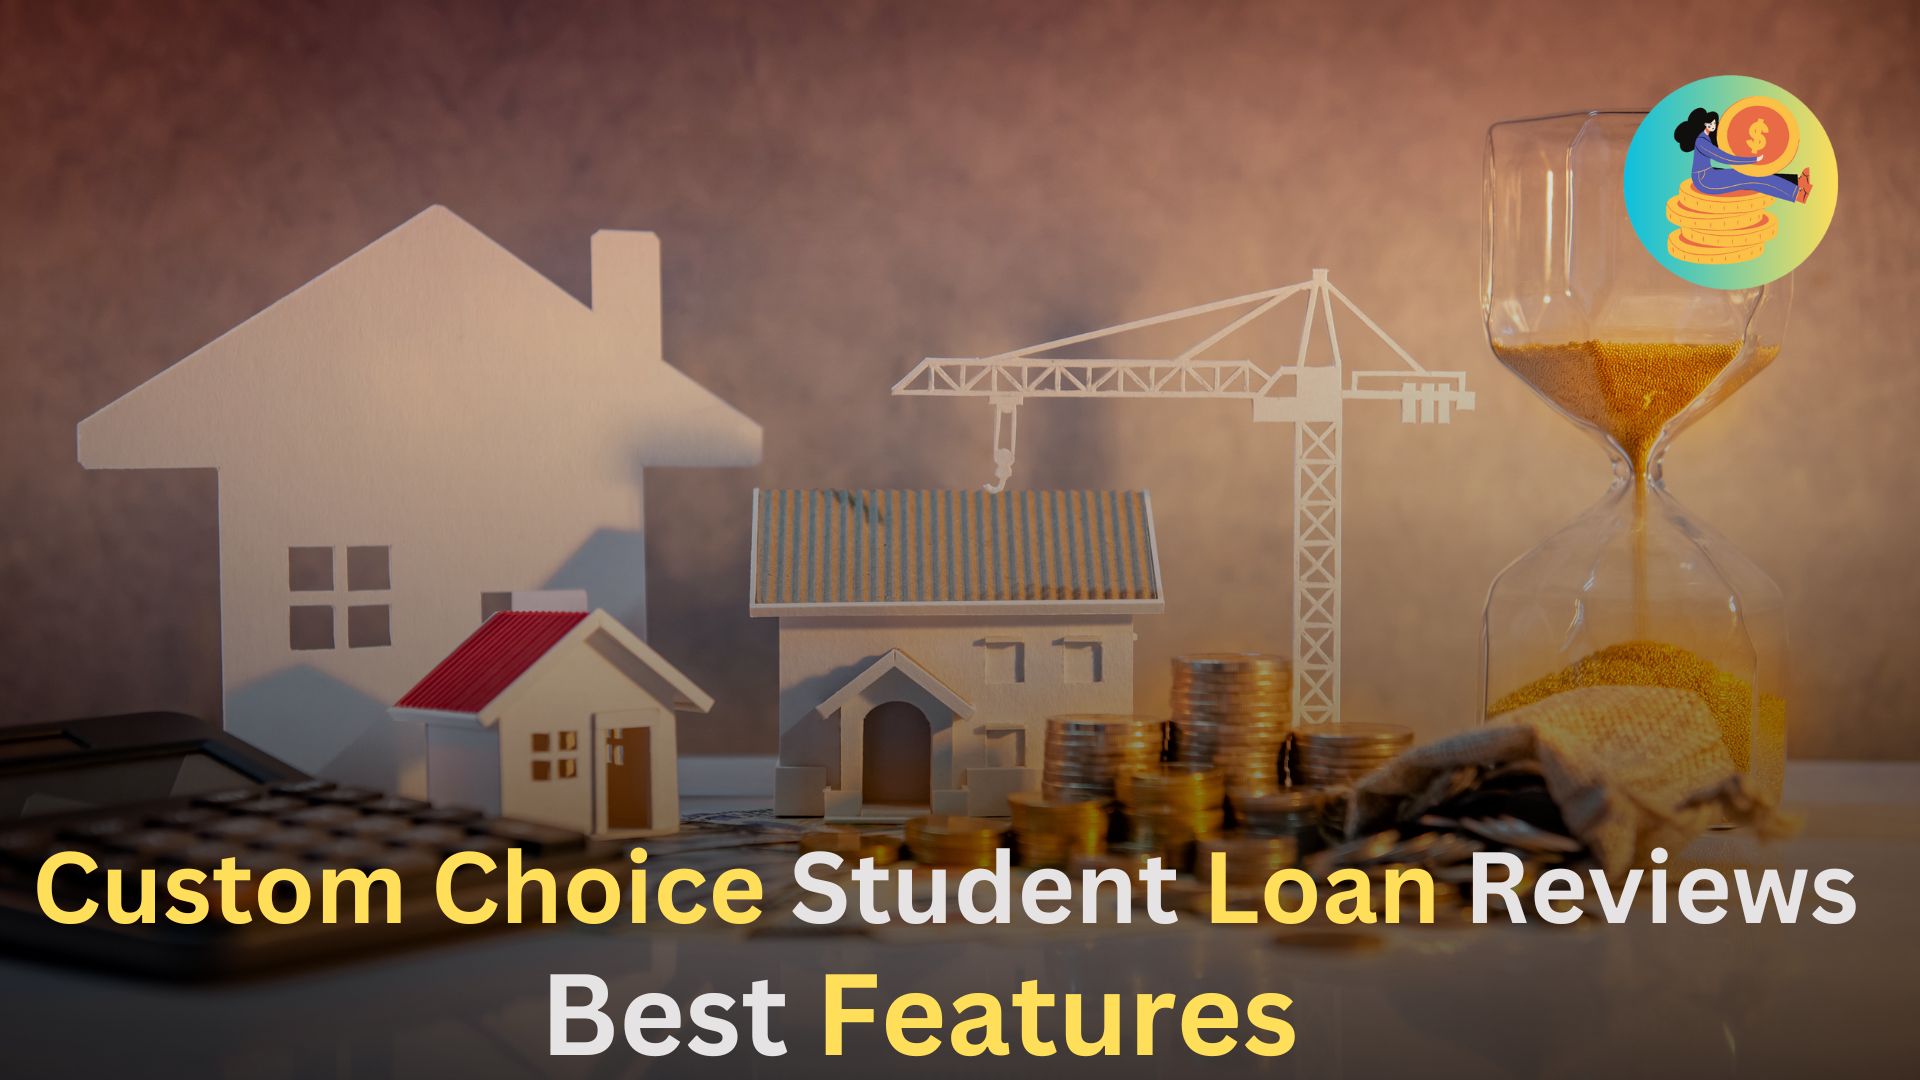 Custom Choice Student Loan Reviewsn, Best Features